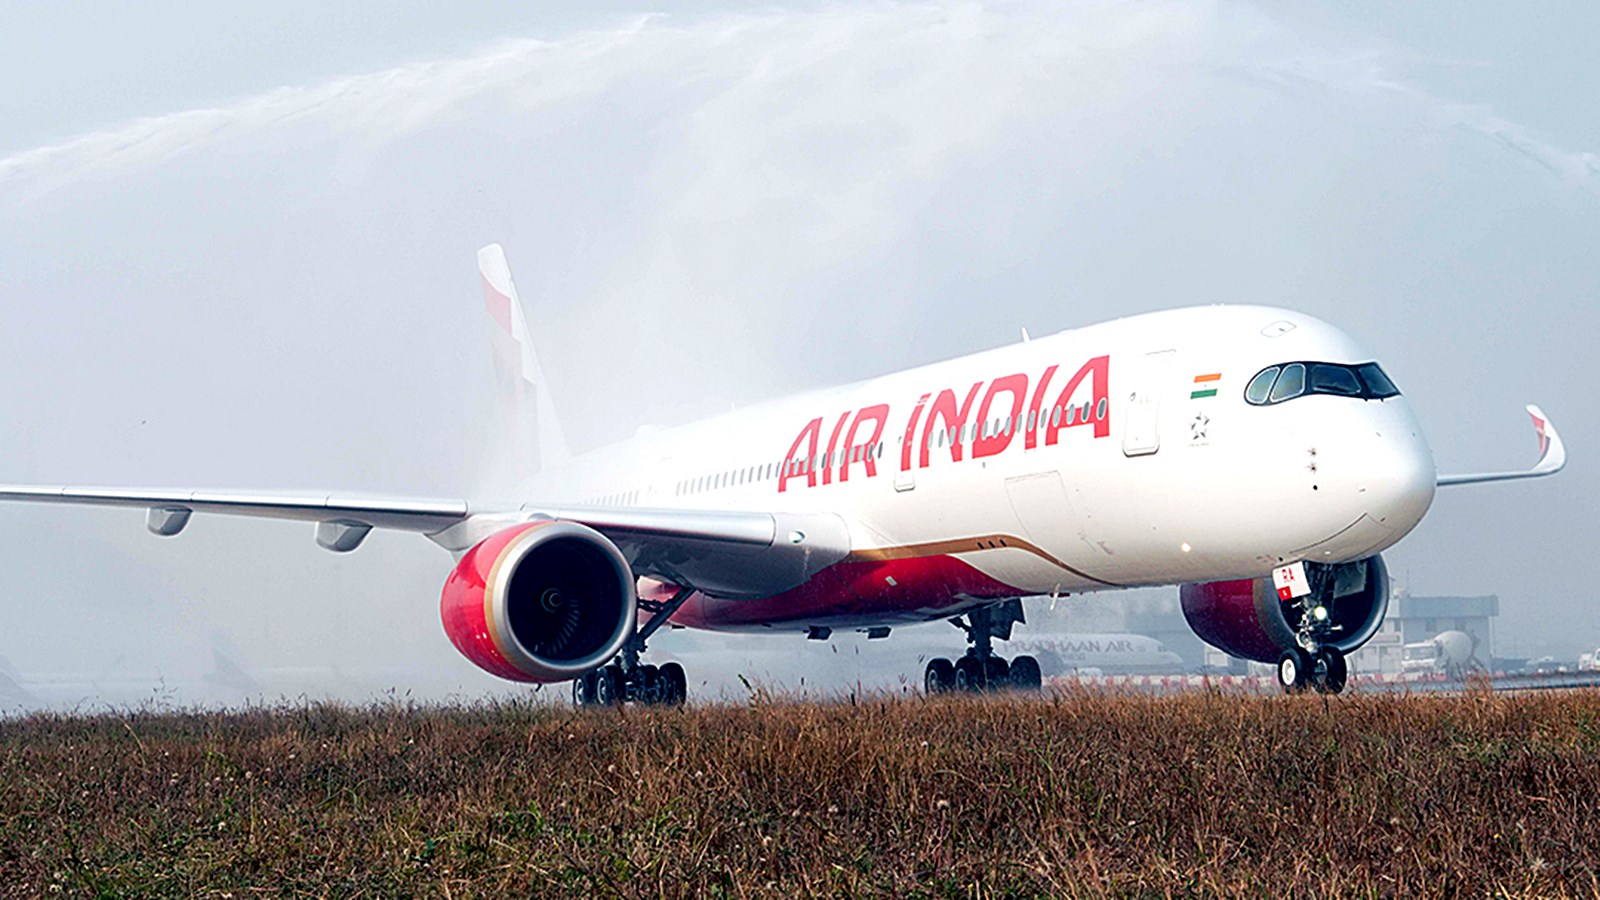 Air India to start operating A350 aircraft from January 22